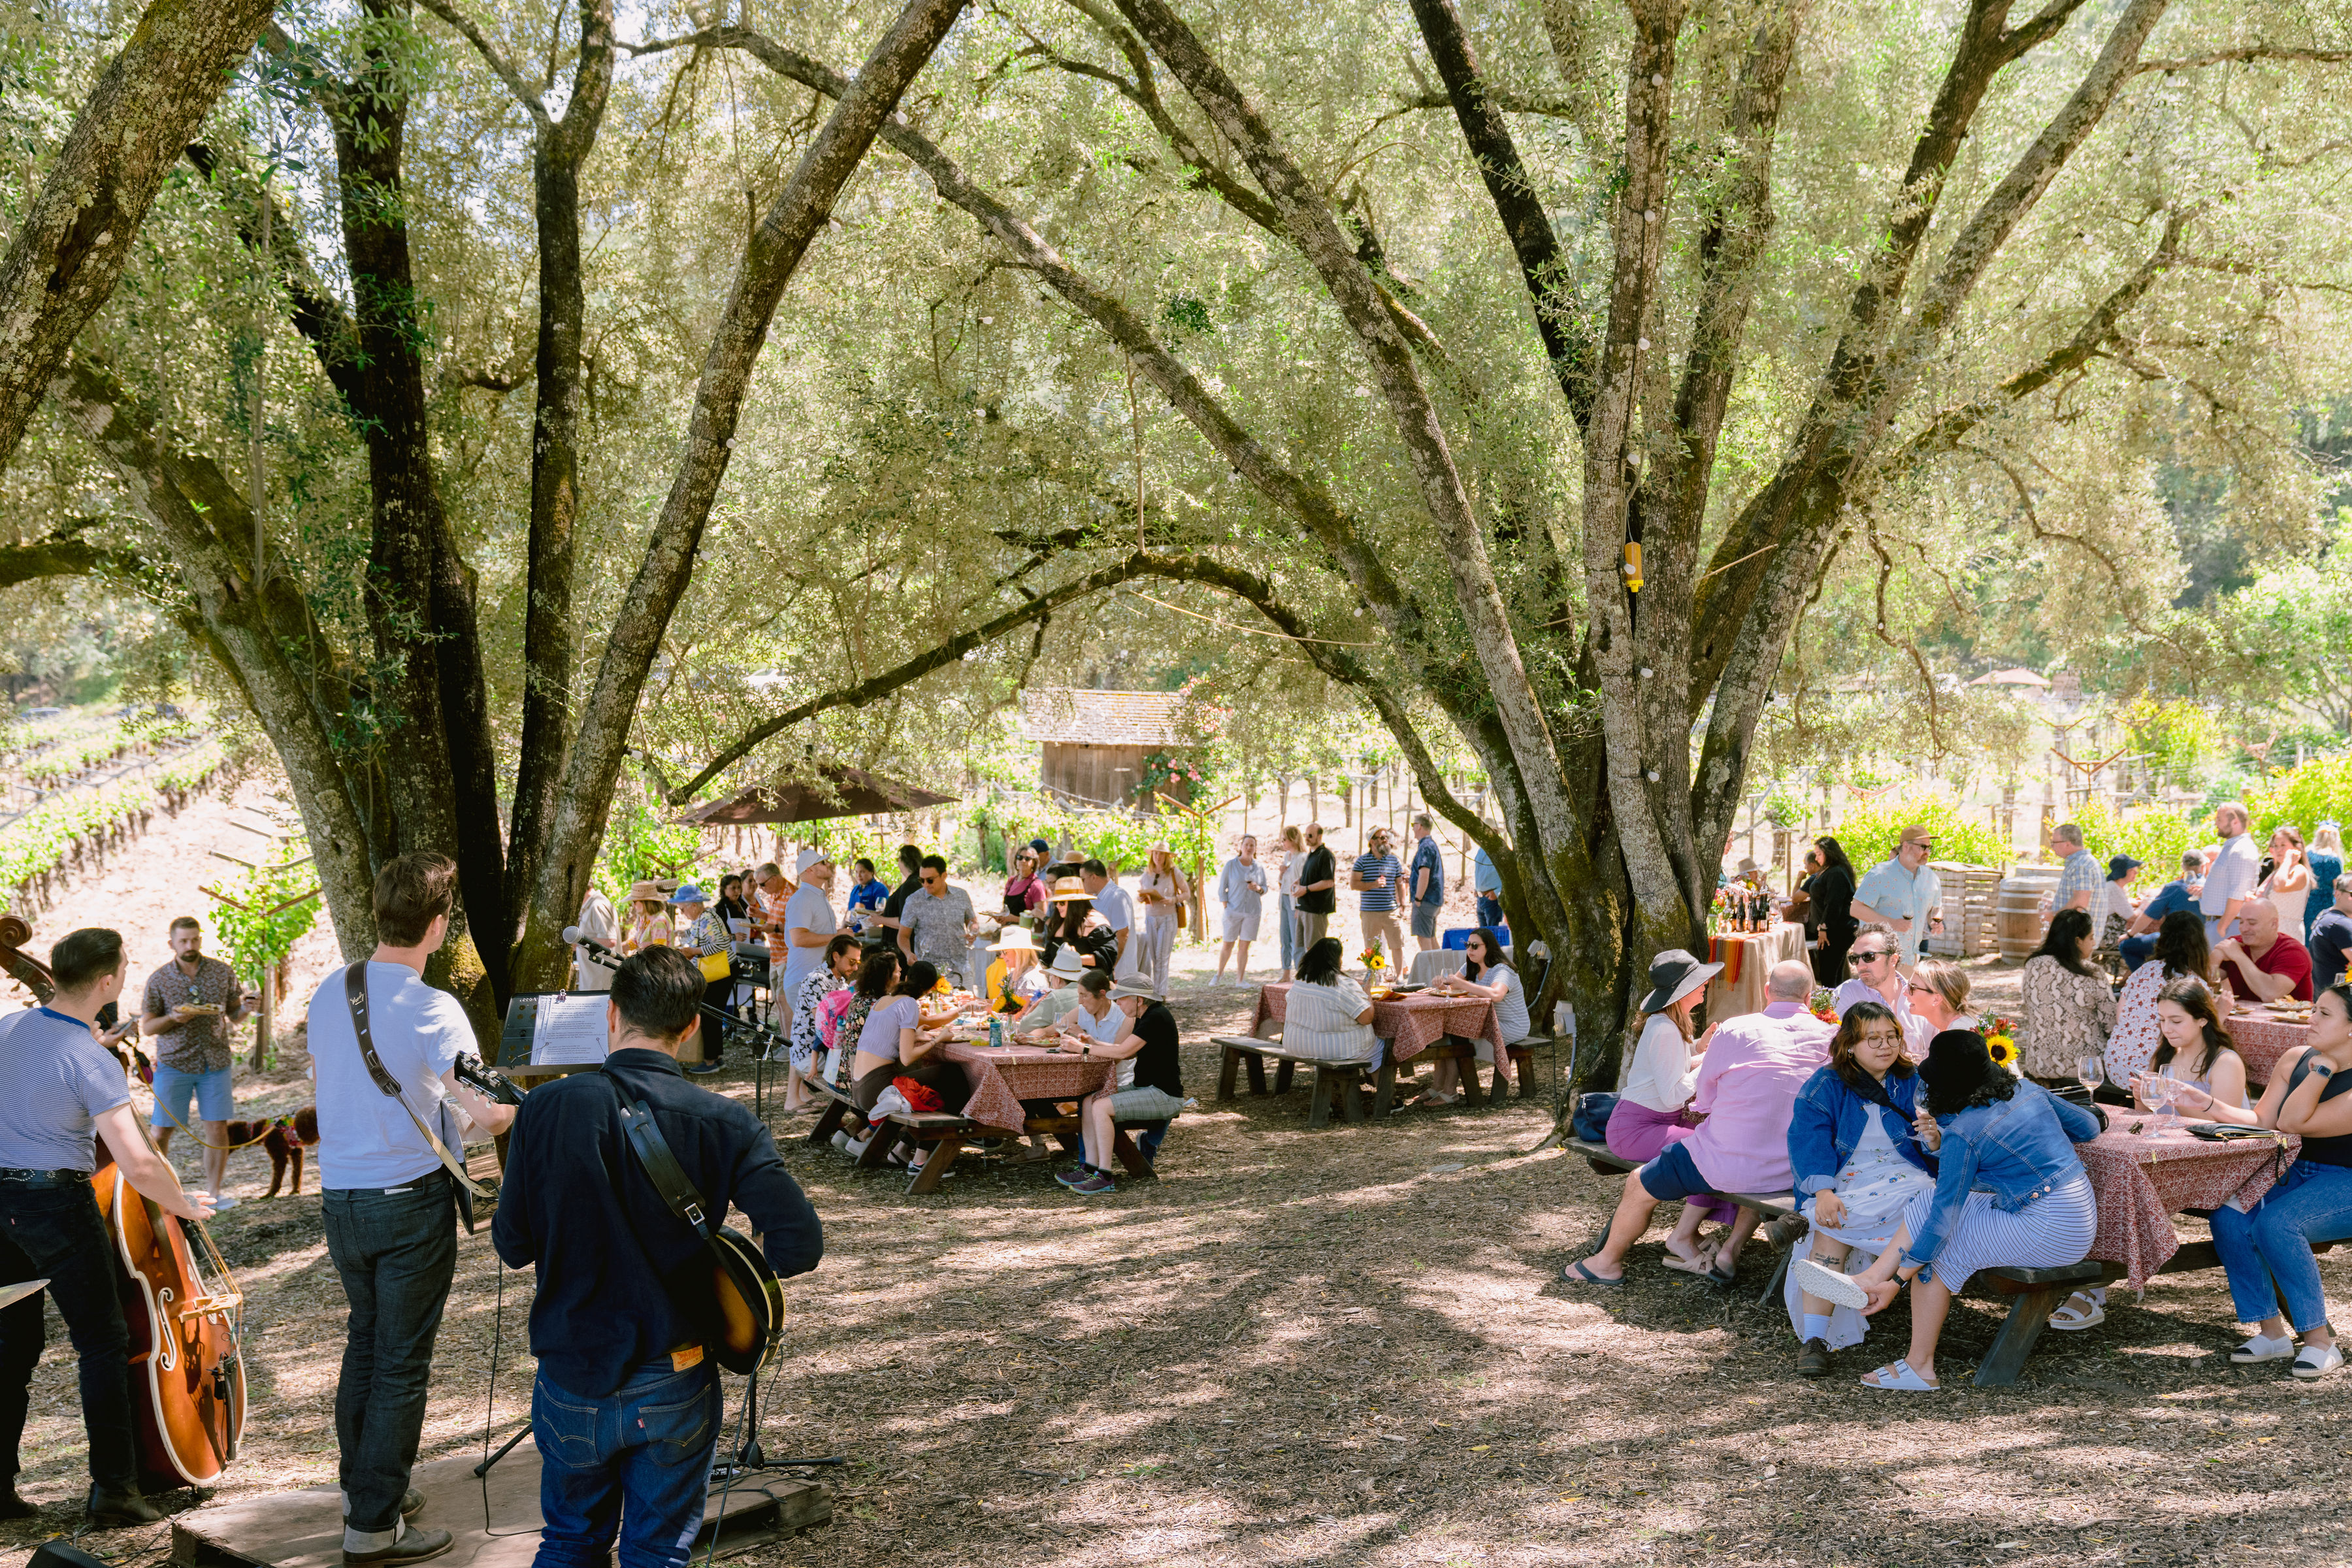 Music playing to attendees seated in Olive Grove